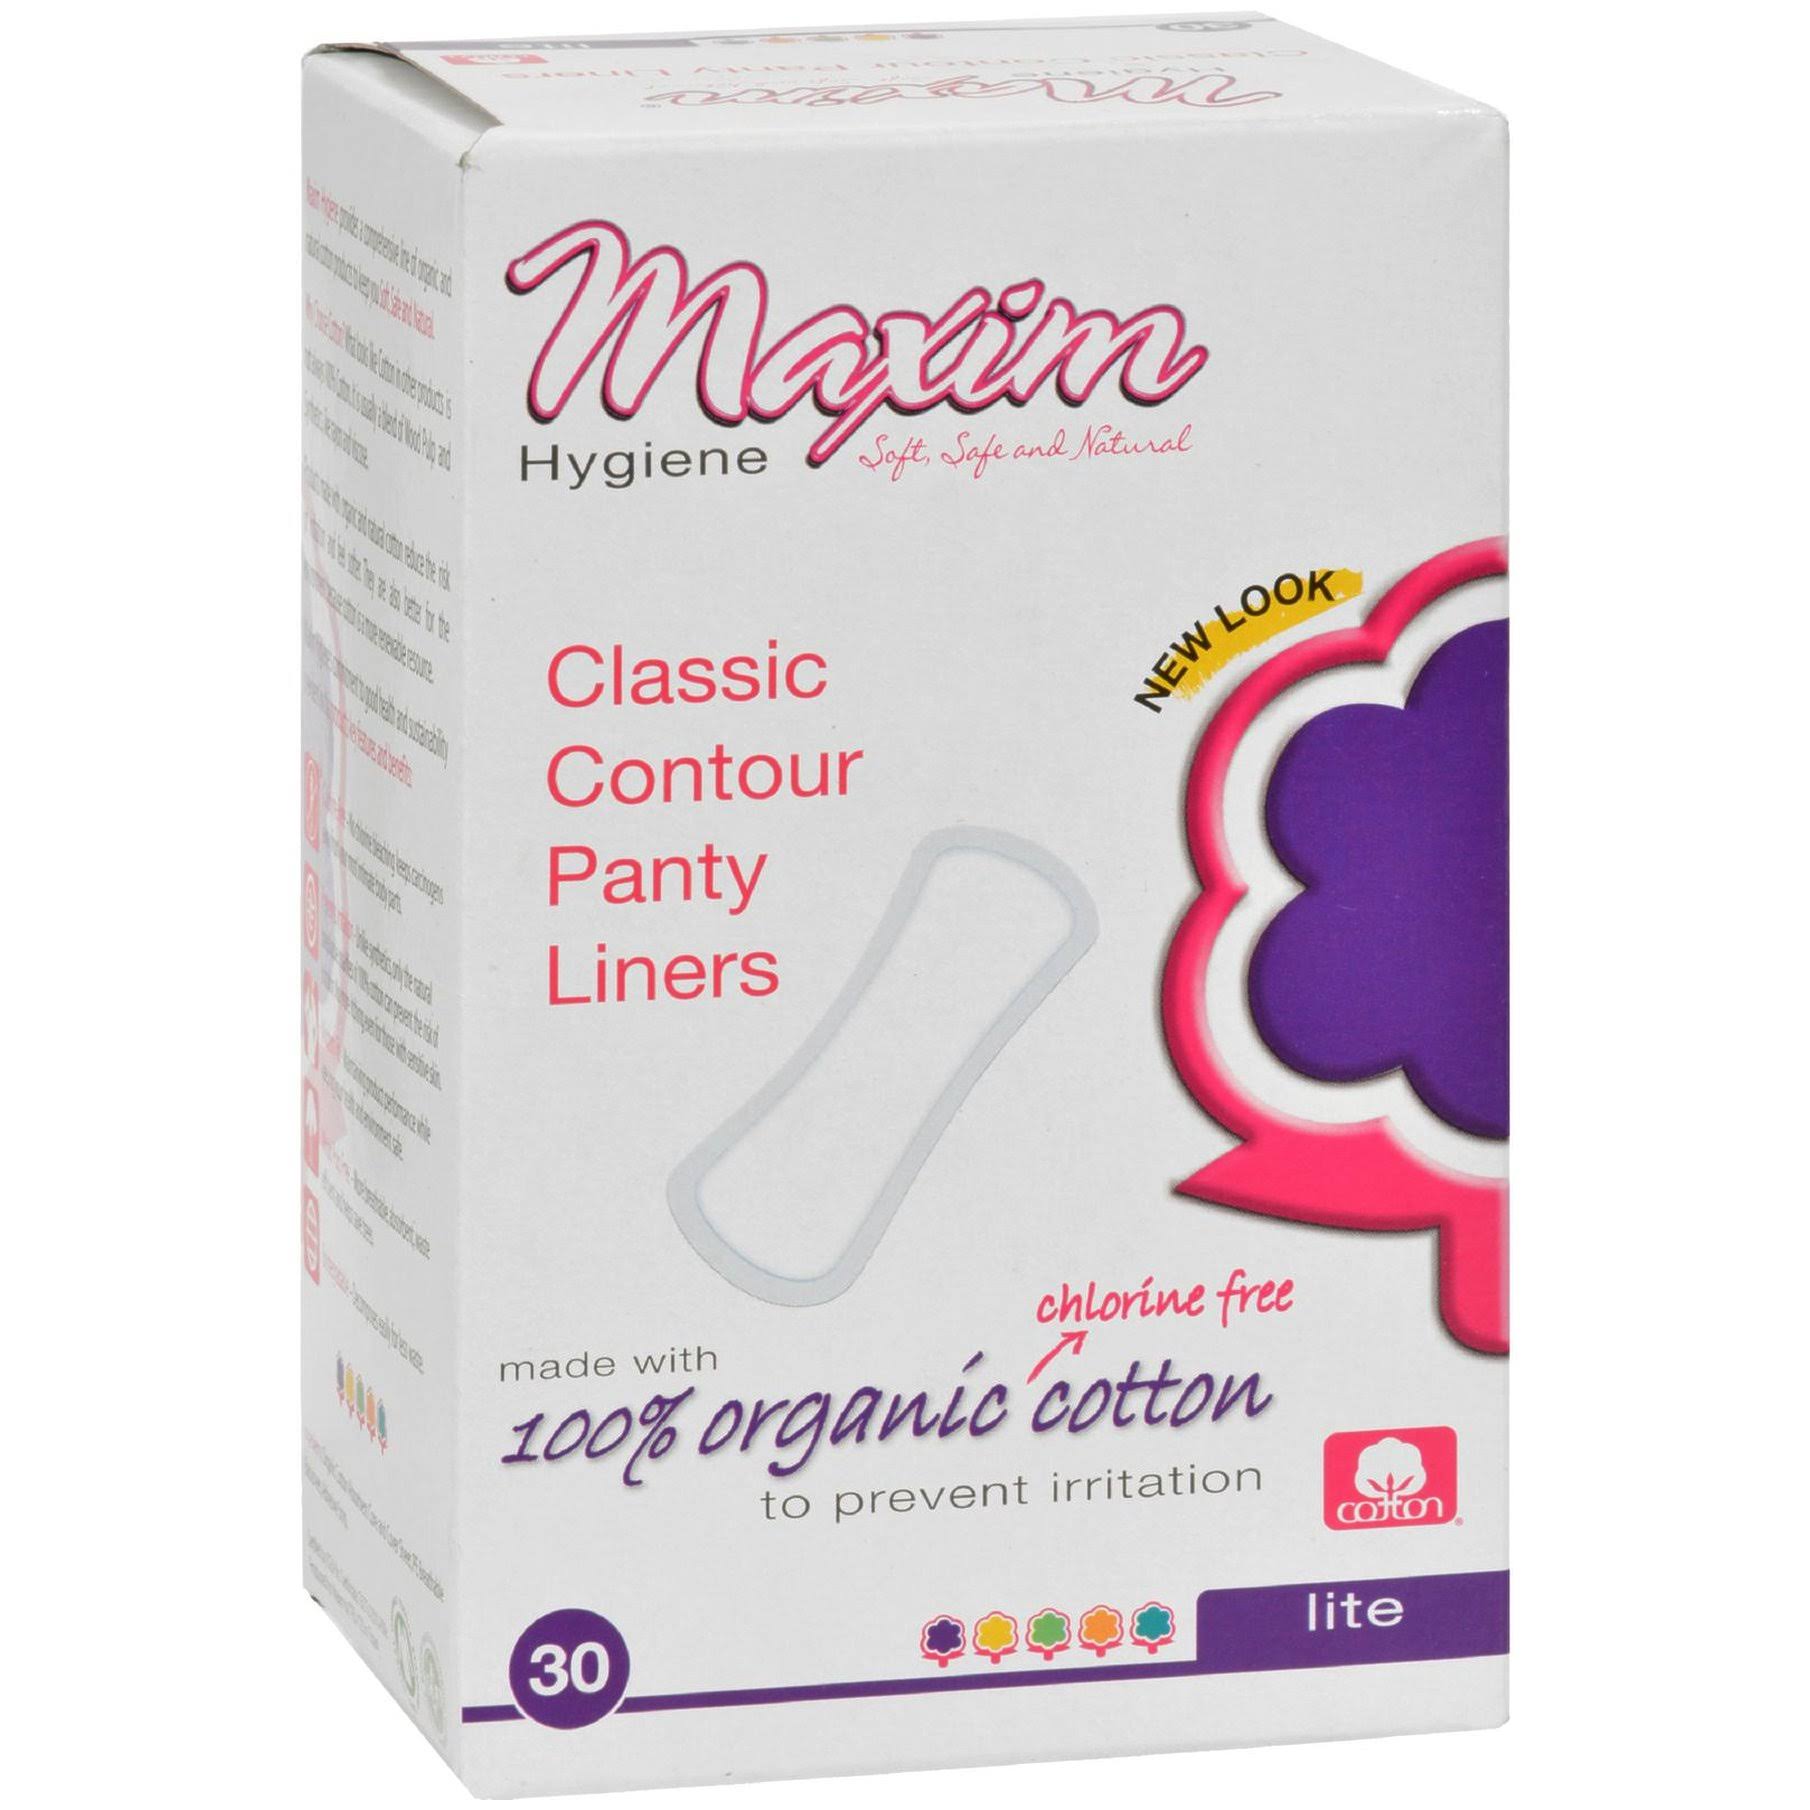 Maxim Organic Contour Hypoallergenic Panty Liners - Light Days, Unscented, 30ct